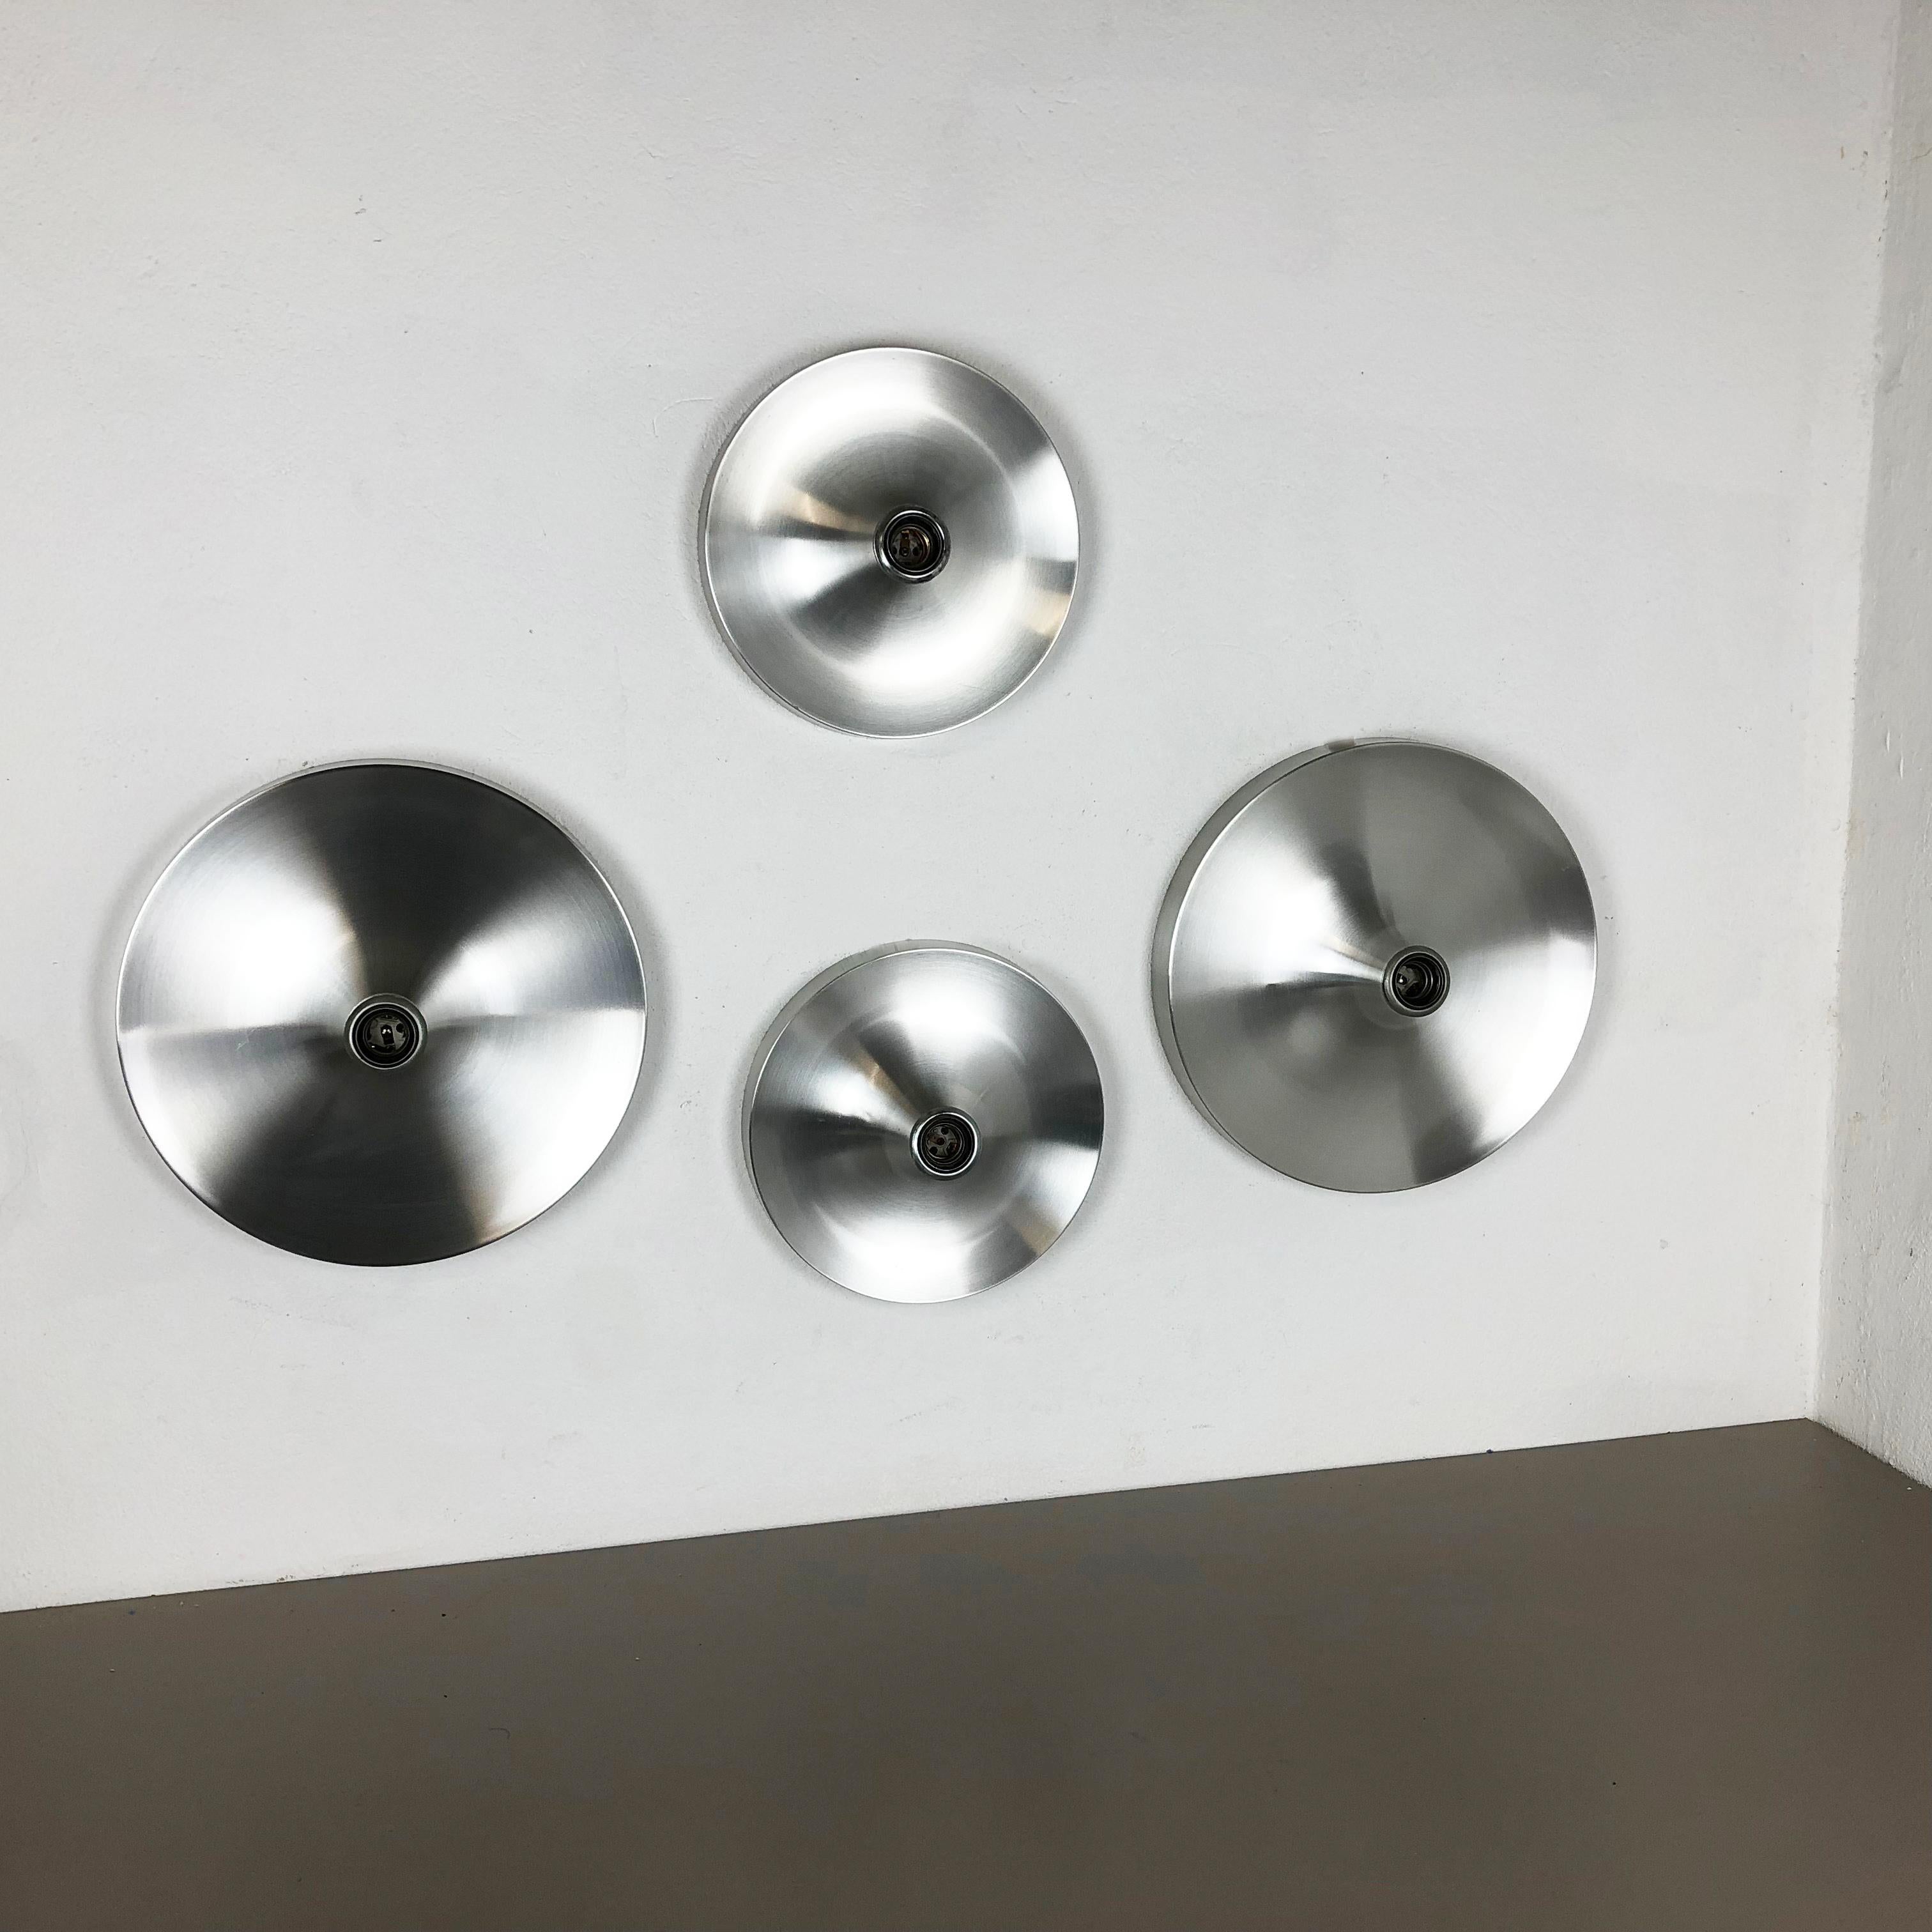 Article:

Set of four wall light sconces



Origin:

Germany


Producer:

TEKA Lights, Germany



Age:

1970s


Set of three original 1970s modernist German wall light made of solid metal aluminum. This set was produced by Teka